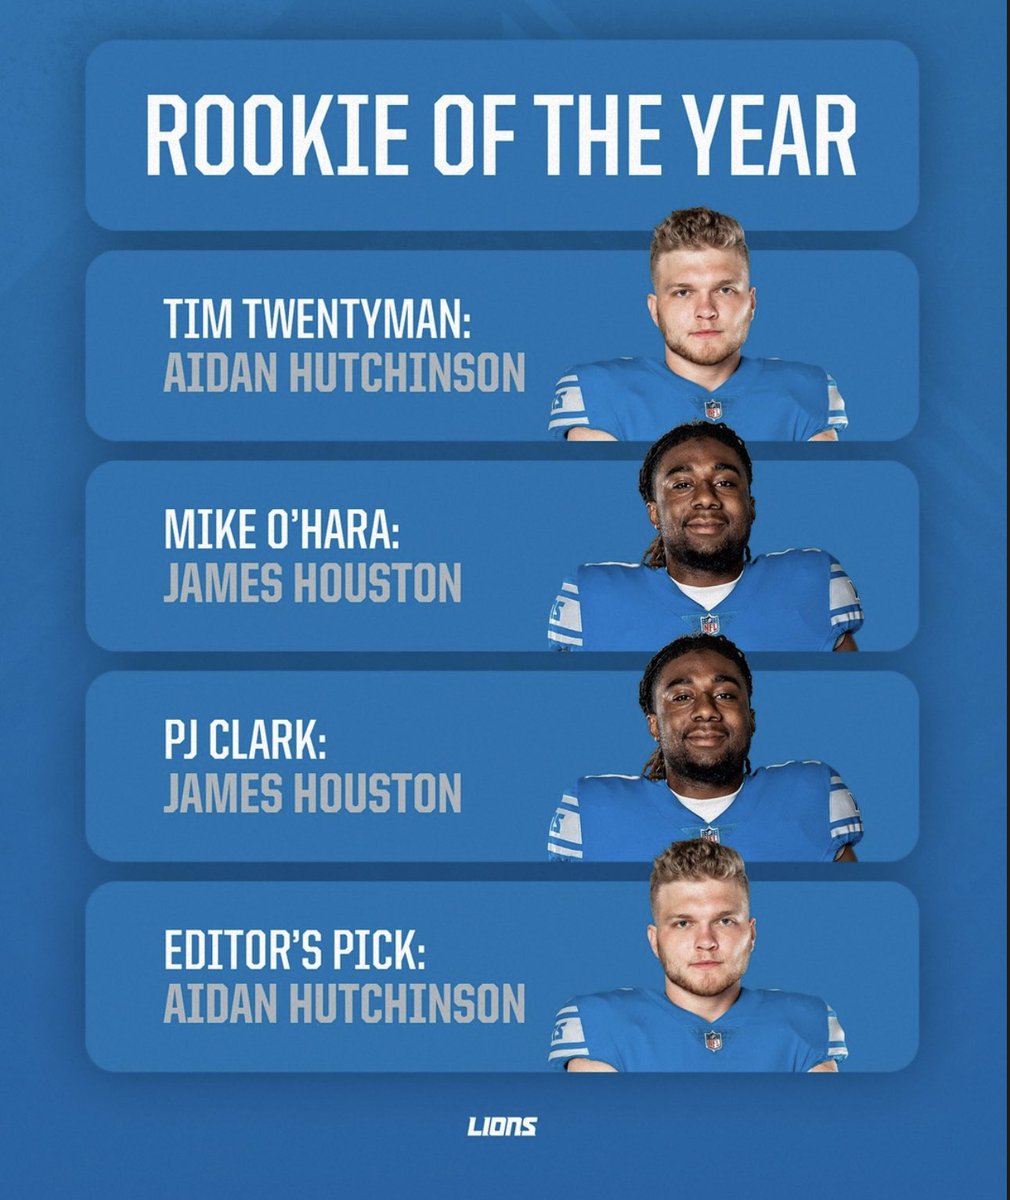 🚨 Former Tiger, James Houston IV a.k.a “Thee Problem” , received honors for the Detroit Lions’ Rookie Of The Year Award. (📸: @detroitlionsnfl ) 
#nfl #news #nflnews #nflawards #detroit #lions #detroitlions #explorepage #fyp #share #football #rookie #roty